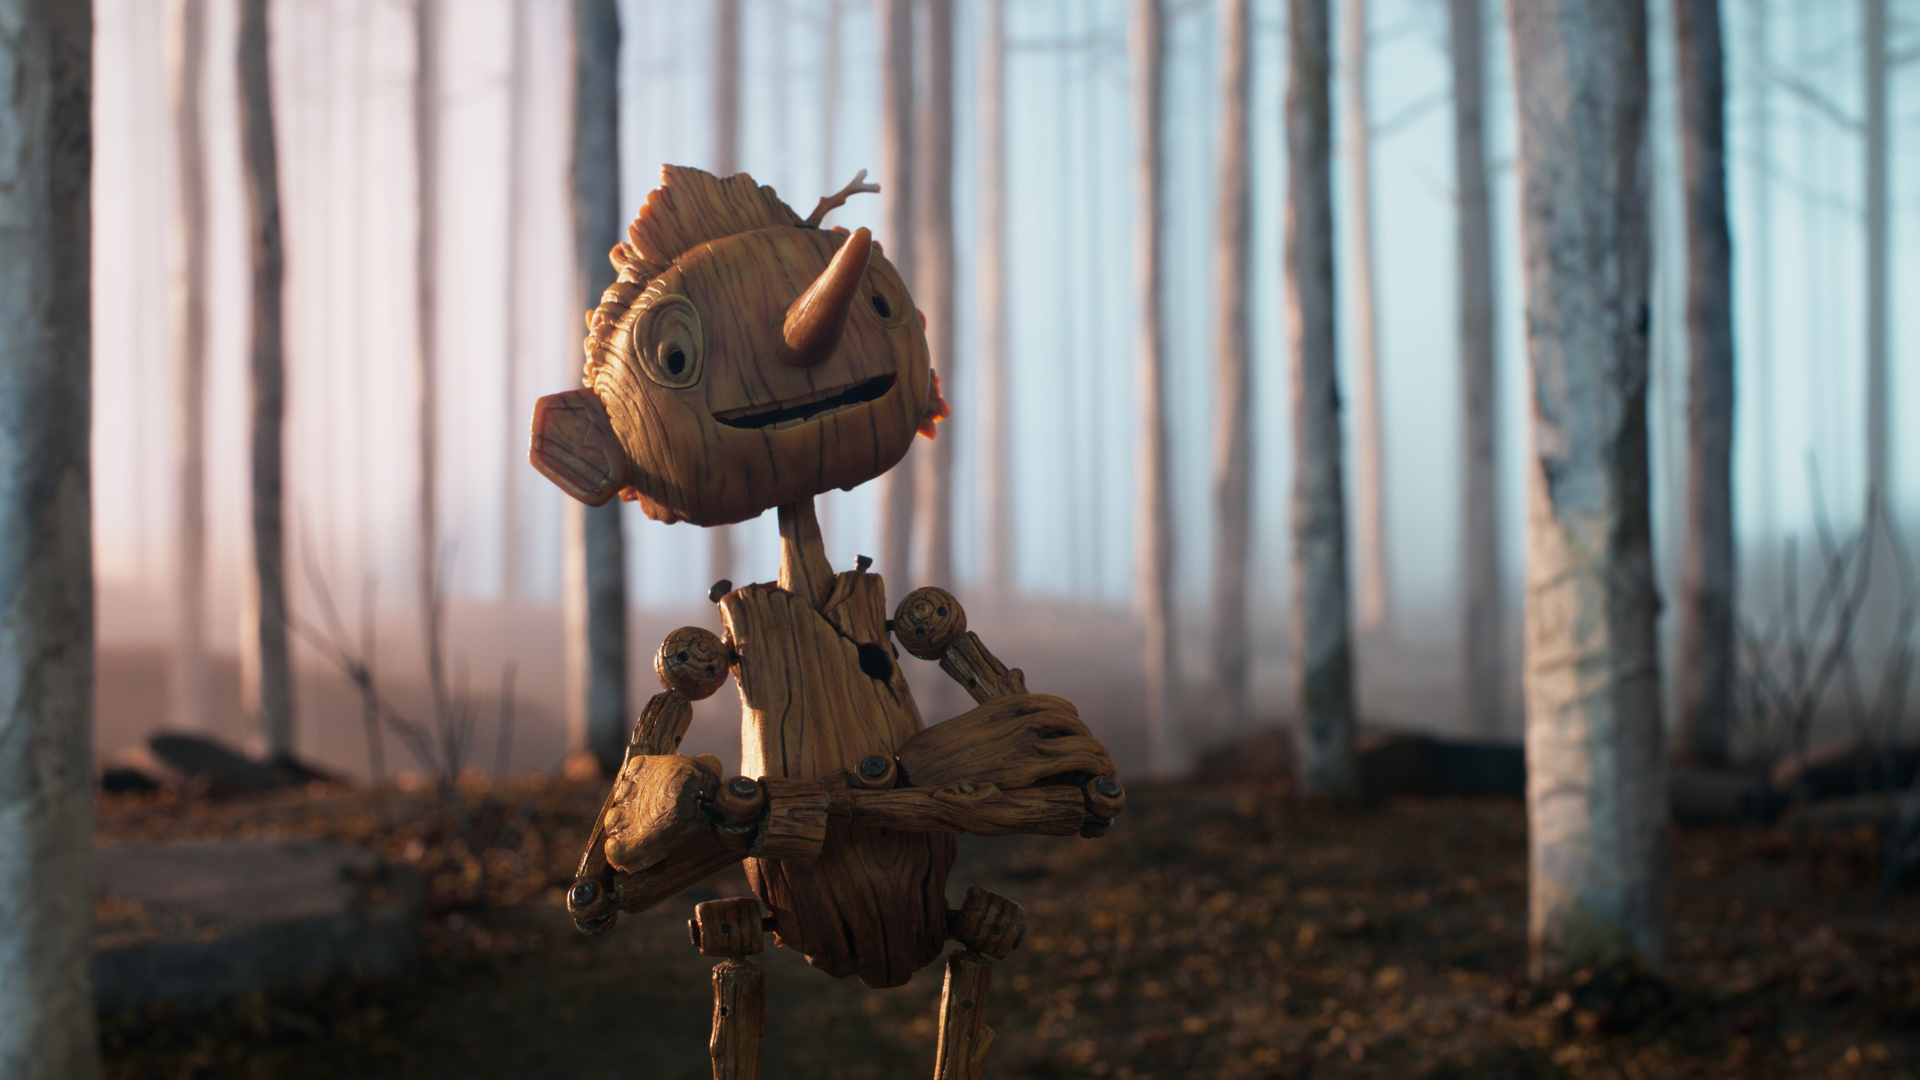 Pinocchio smiles as he crosses his arms in a forest in Guillermo del Toro's stop-motion movie adaptation for Netflix